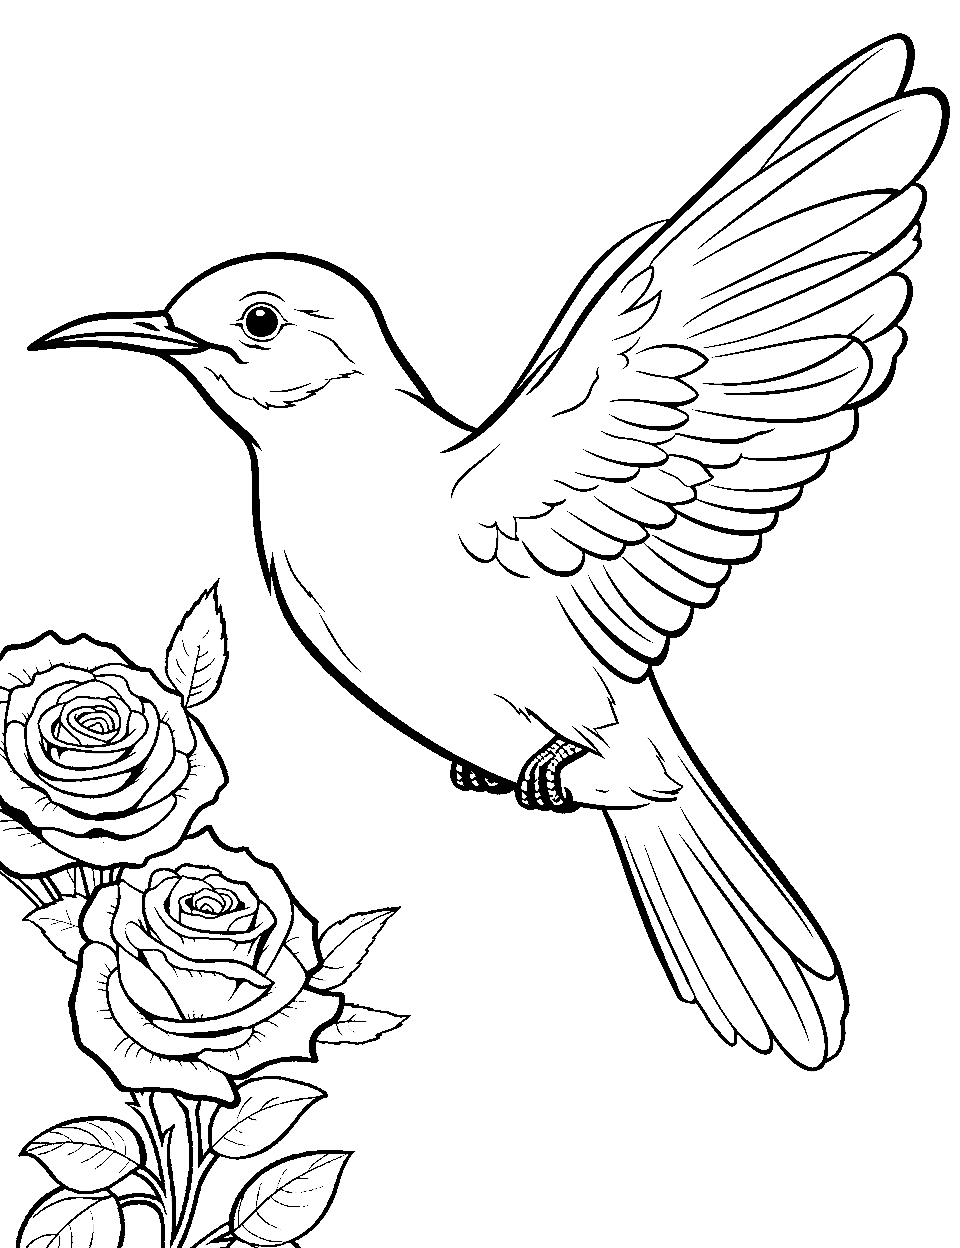 Realistic Hummingbird Coloring Page - A realistic hummingbird hovering over some flowers.